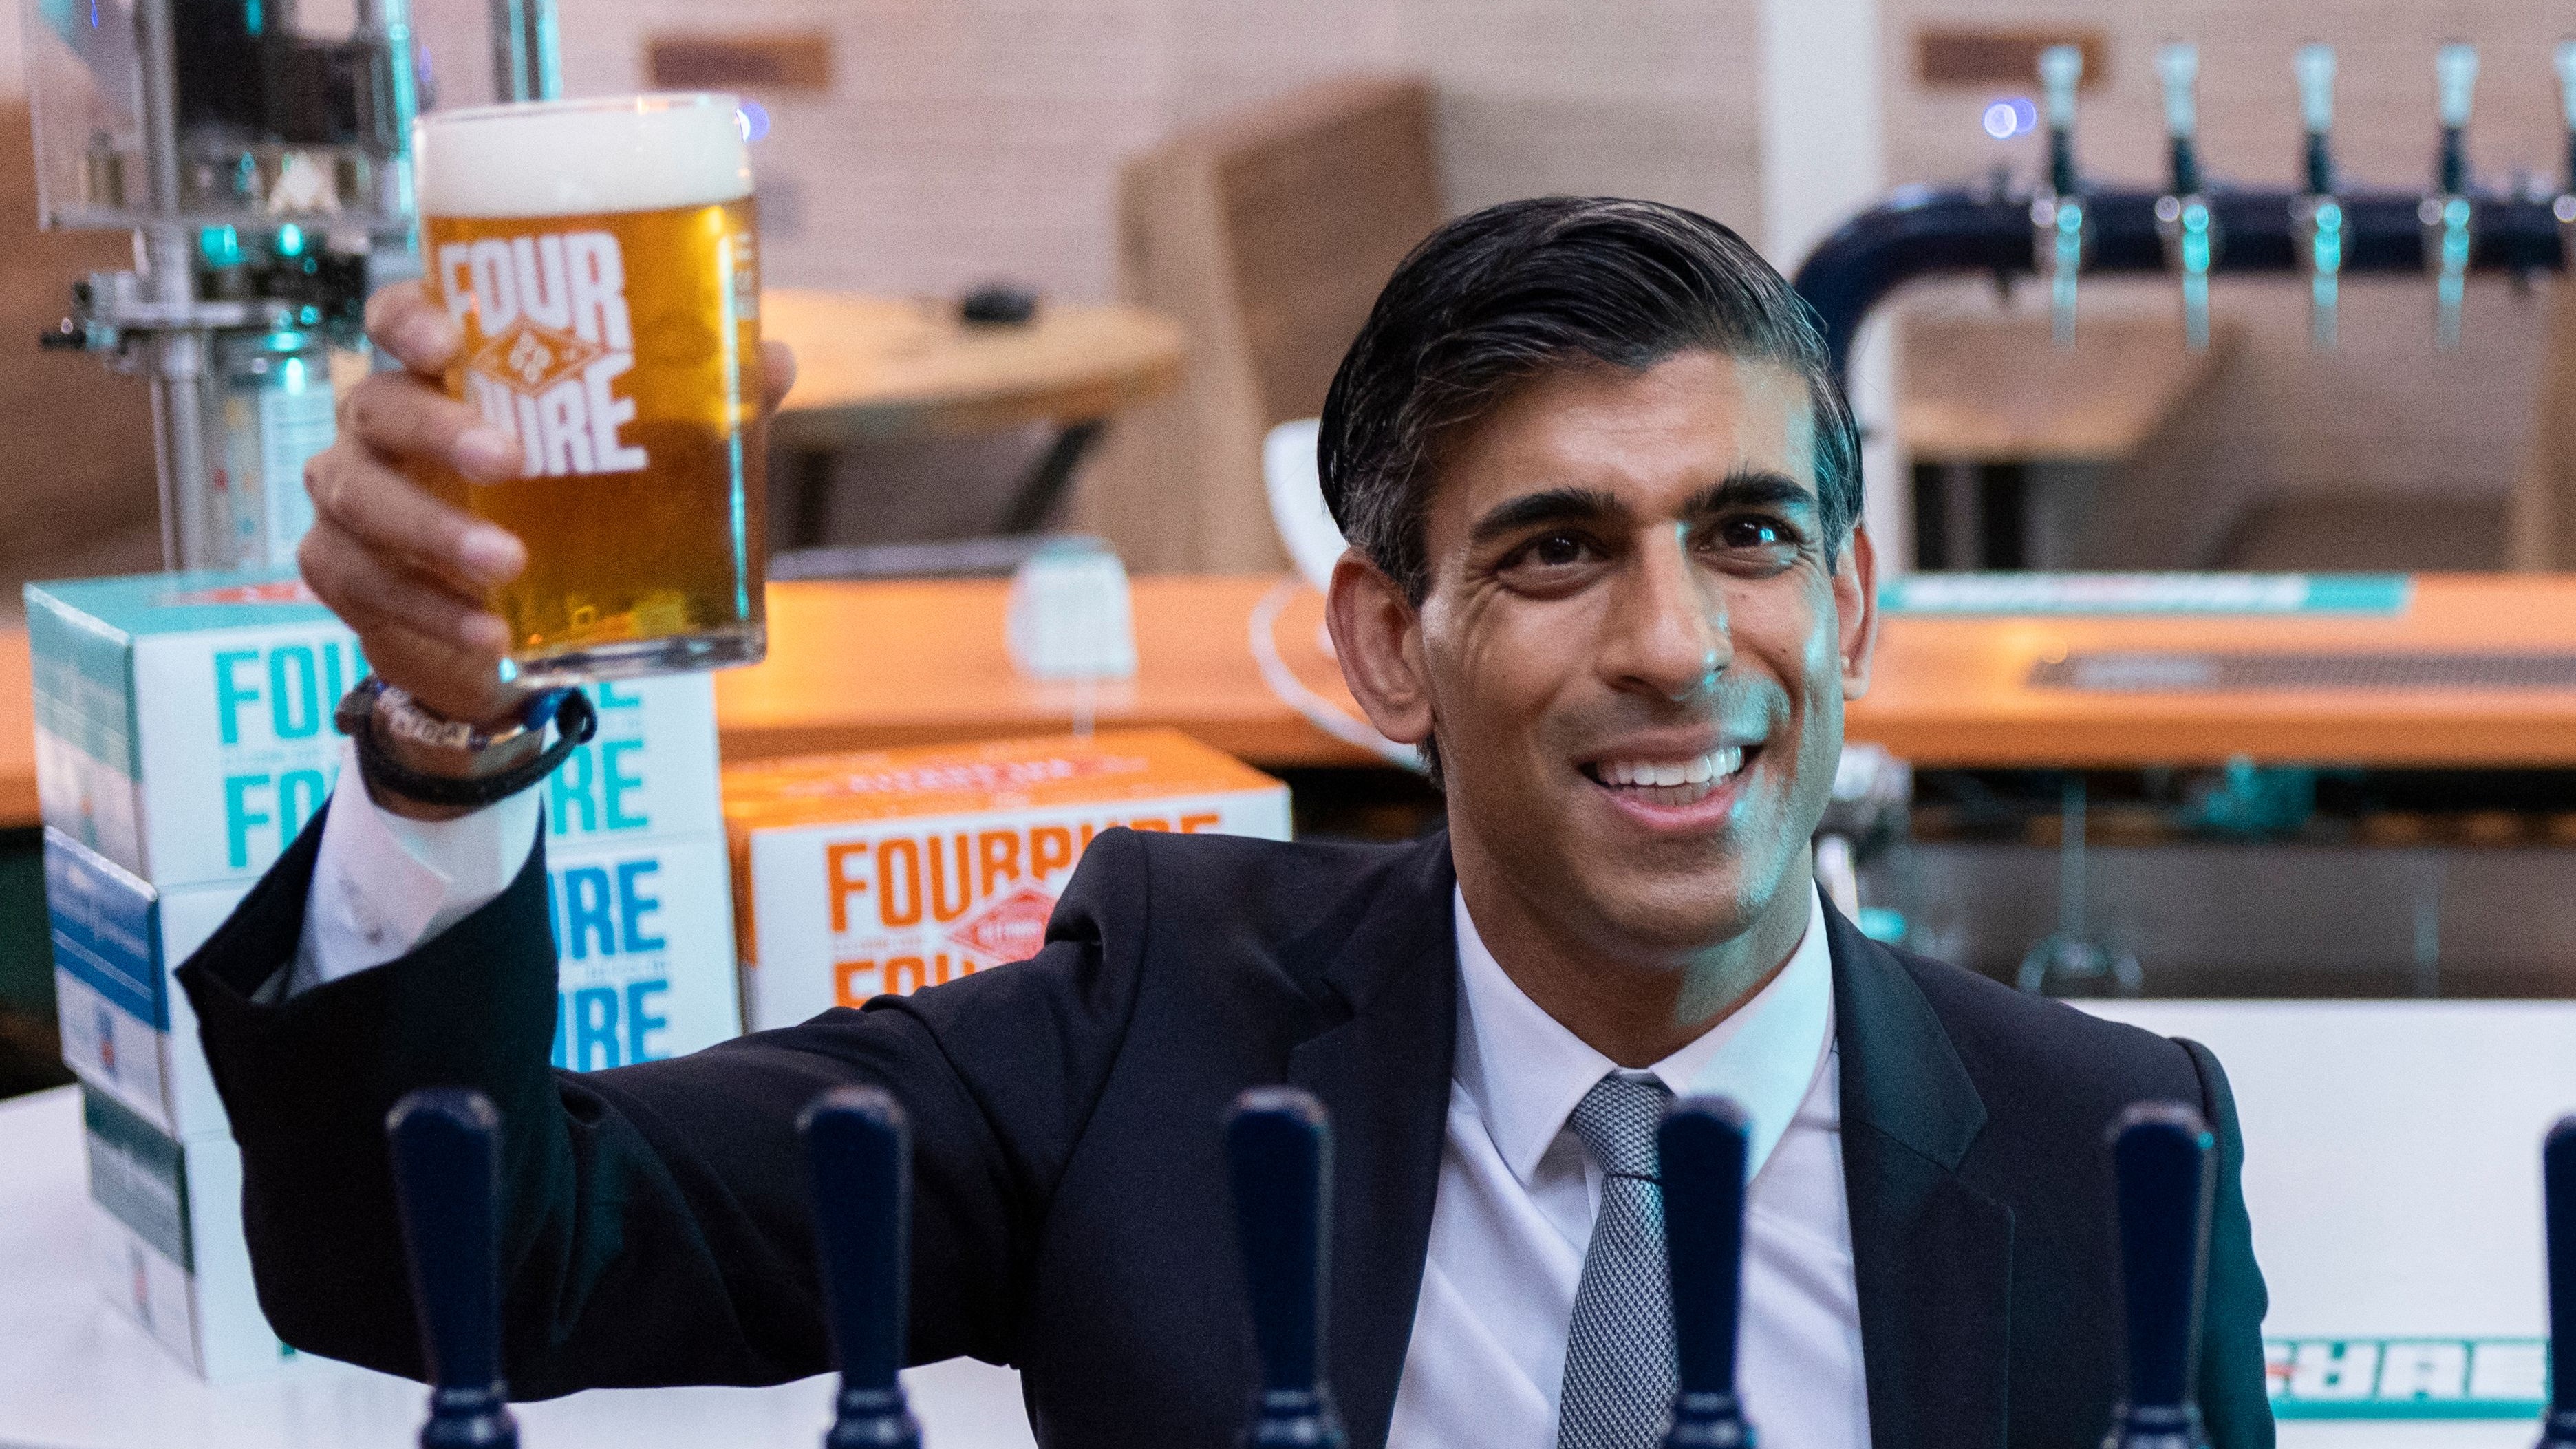 Rishi Sunak during a visit to a brewery in Bermondsey, London